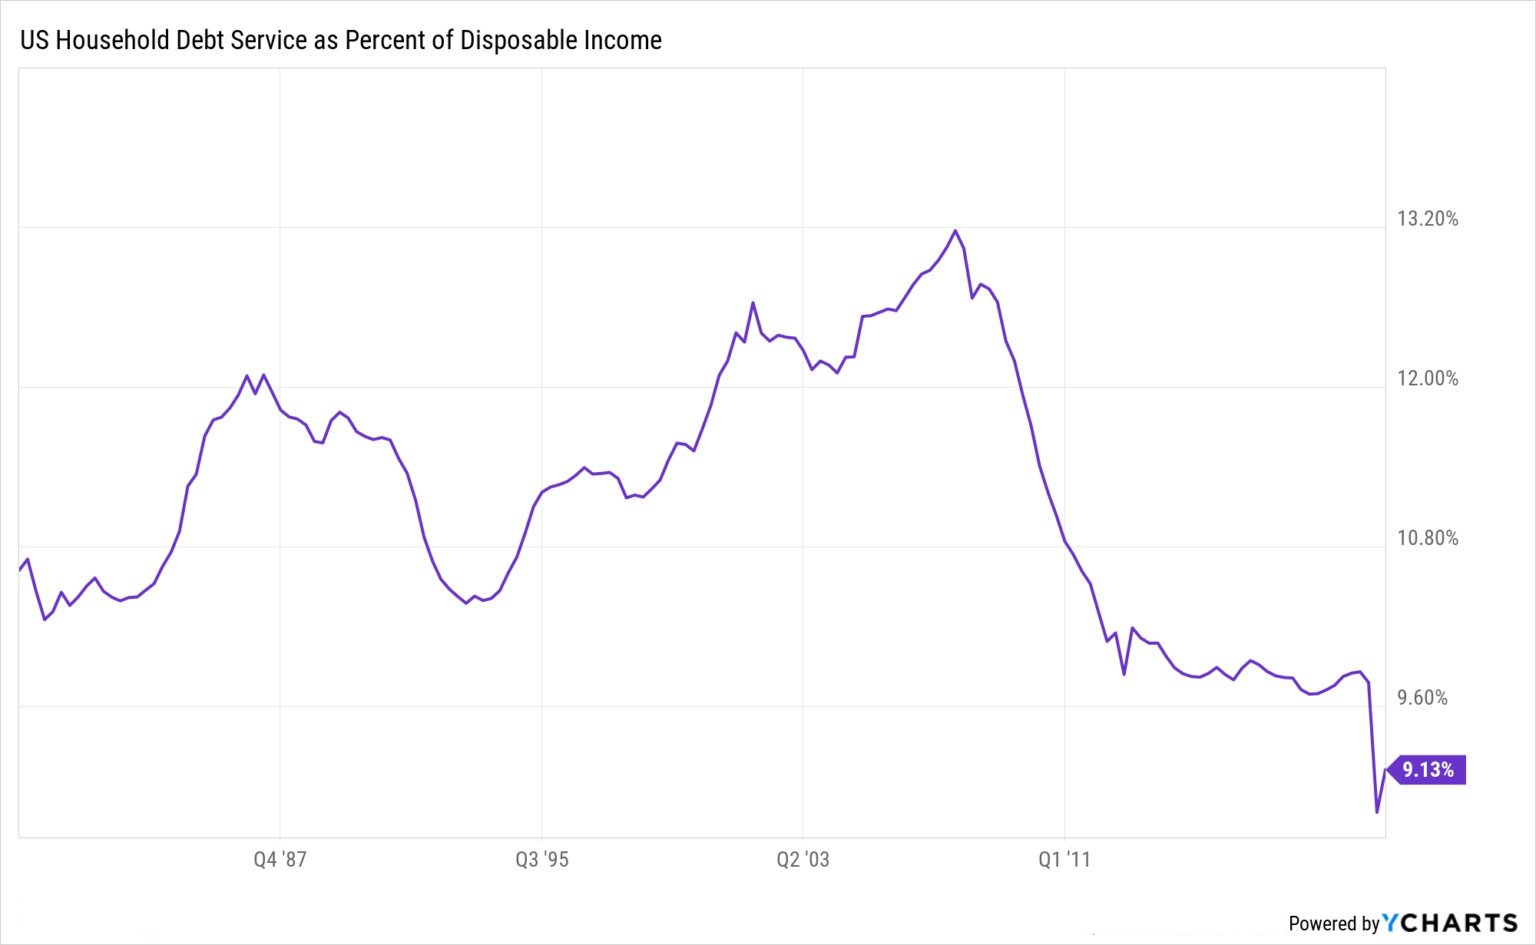 US household debt service as a percent of disposable income historical chart